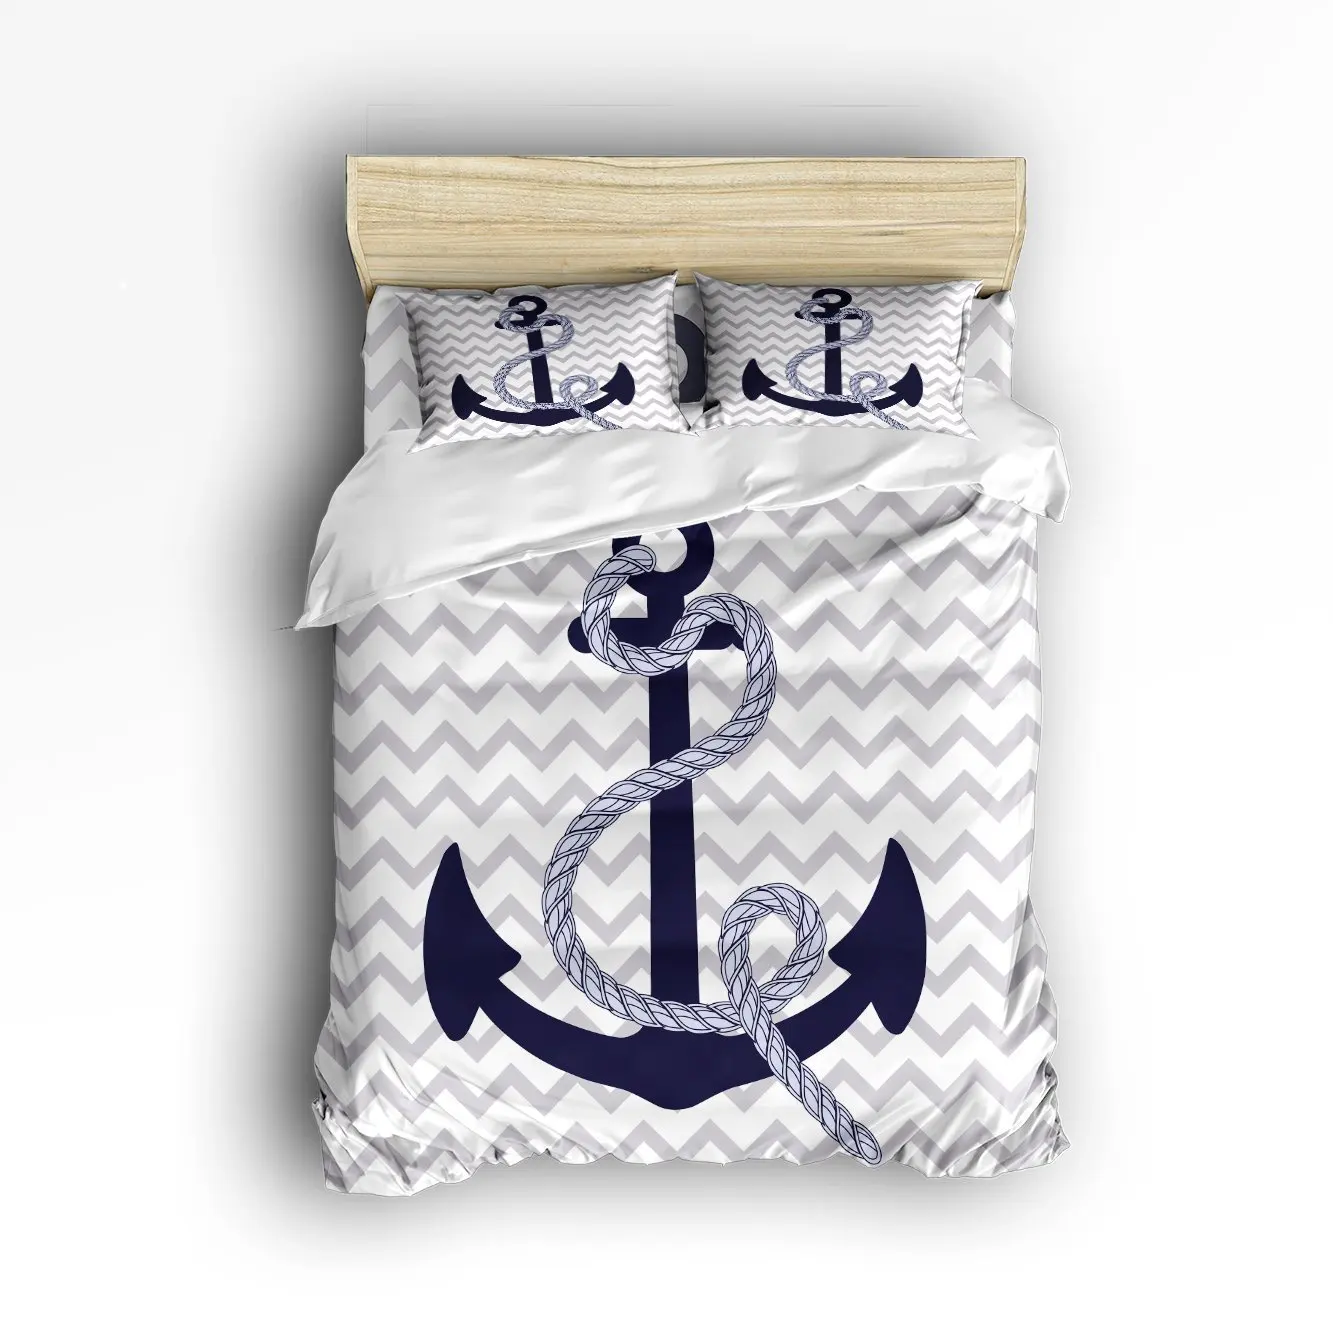 Details about   Full Queen Bed Bag Navy White Anchors Nautical Comforter Sheet Set 7 Pieces NEW 